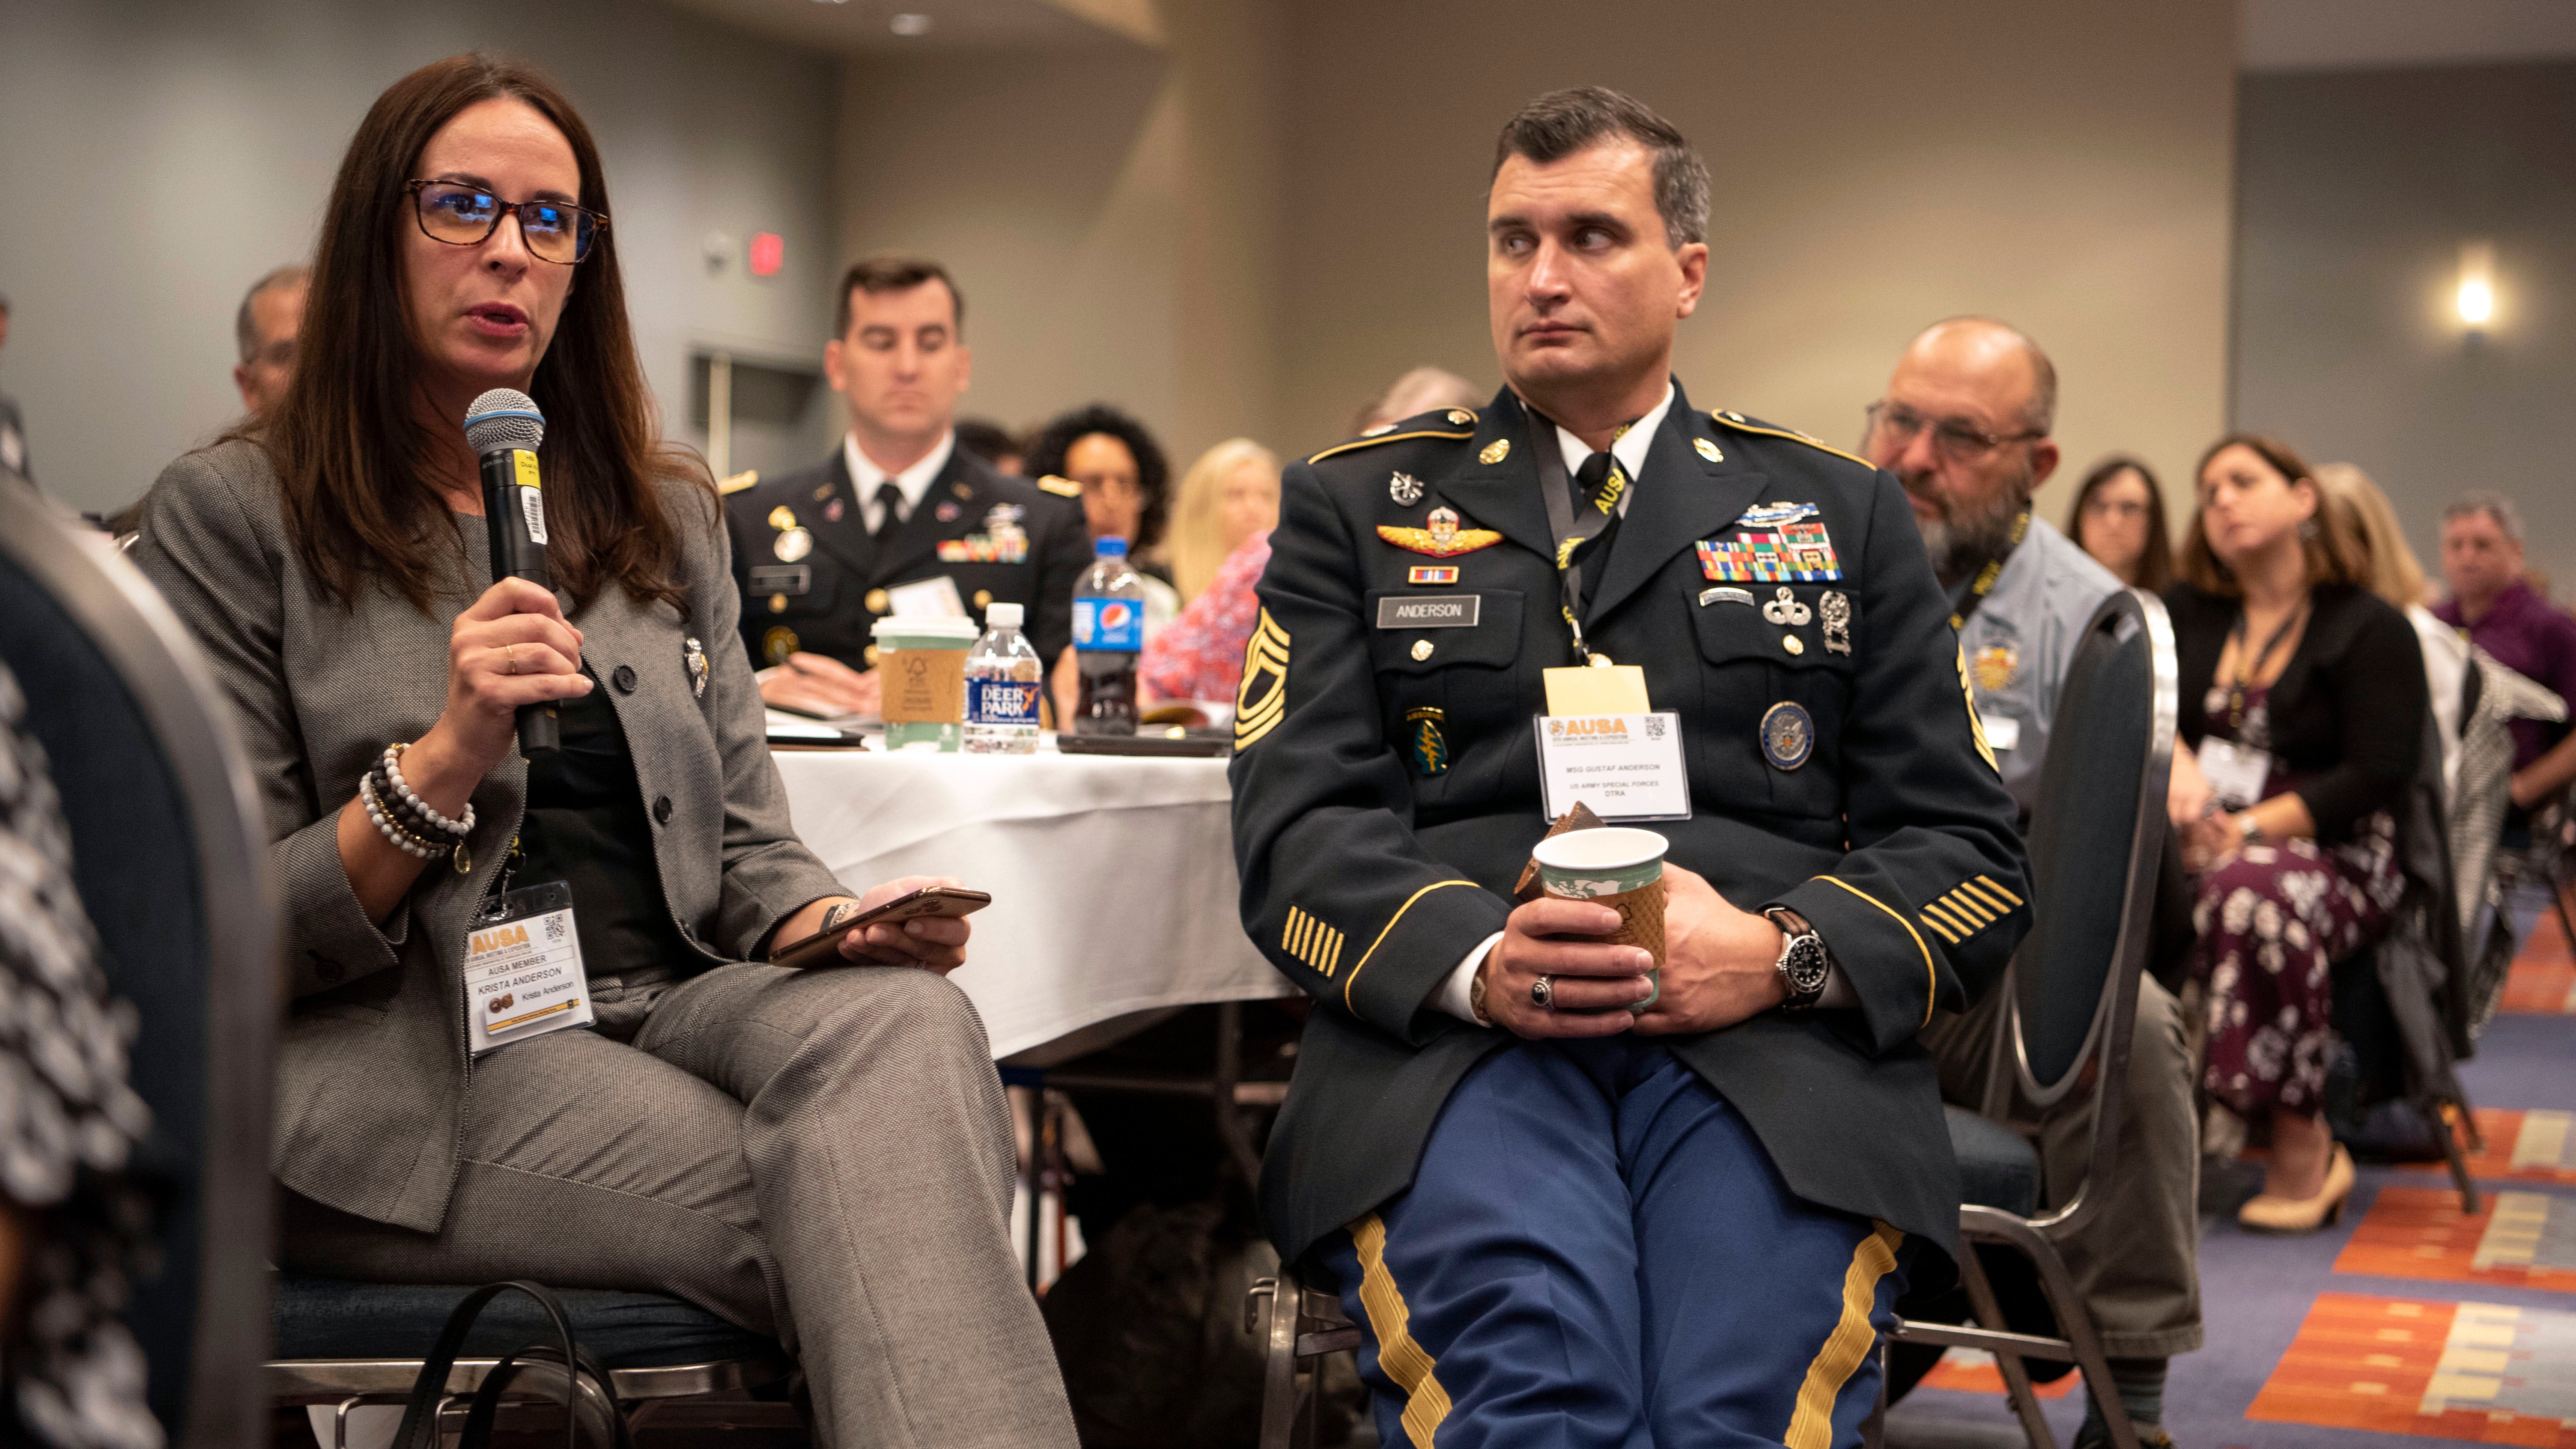 With her husband, MSG Gustav Anderson by her side, Krista Anderson asks a question to the panel at the Family Forum II: Army Housing and PCS at the 2019 AUSA Annual Meeting and Exposition at the Washington Convention Center on Oct. 15, 2019.